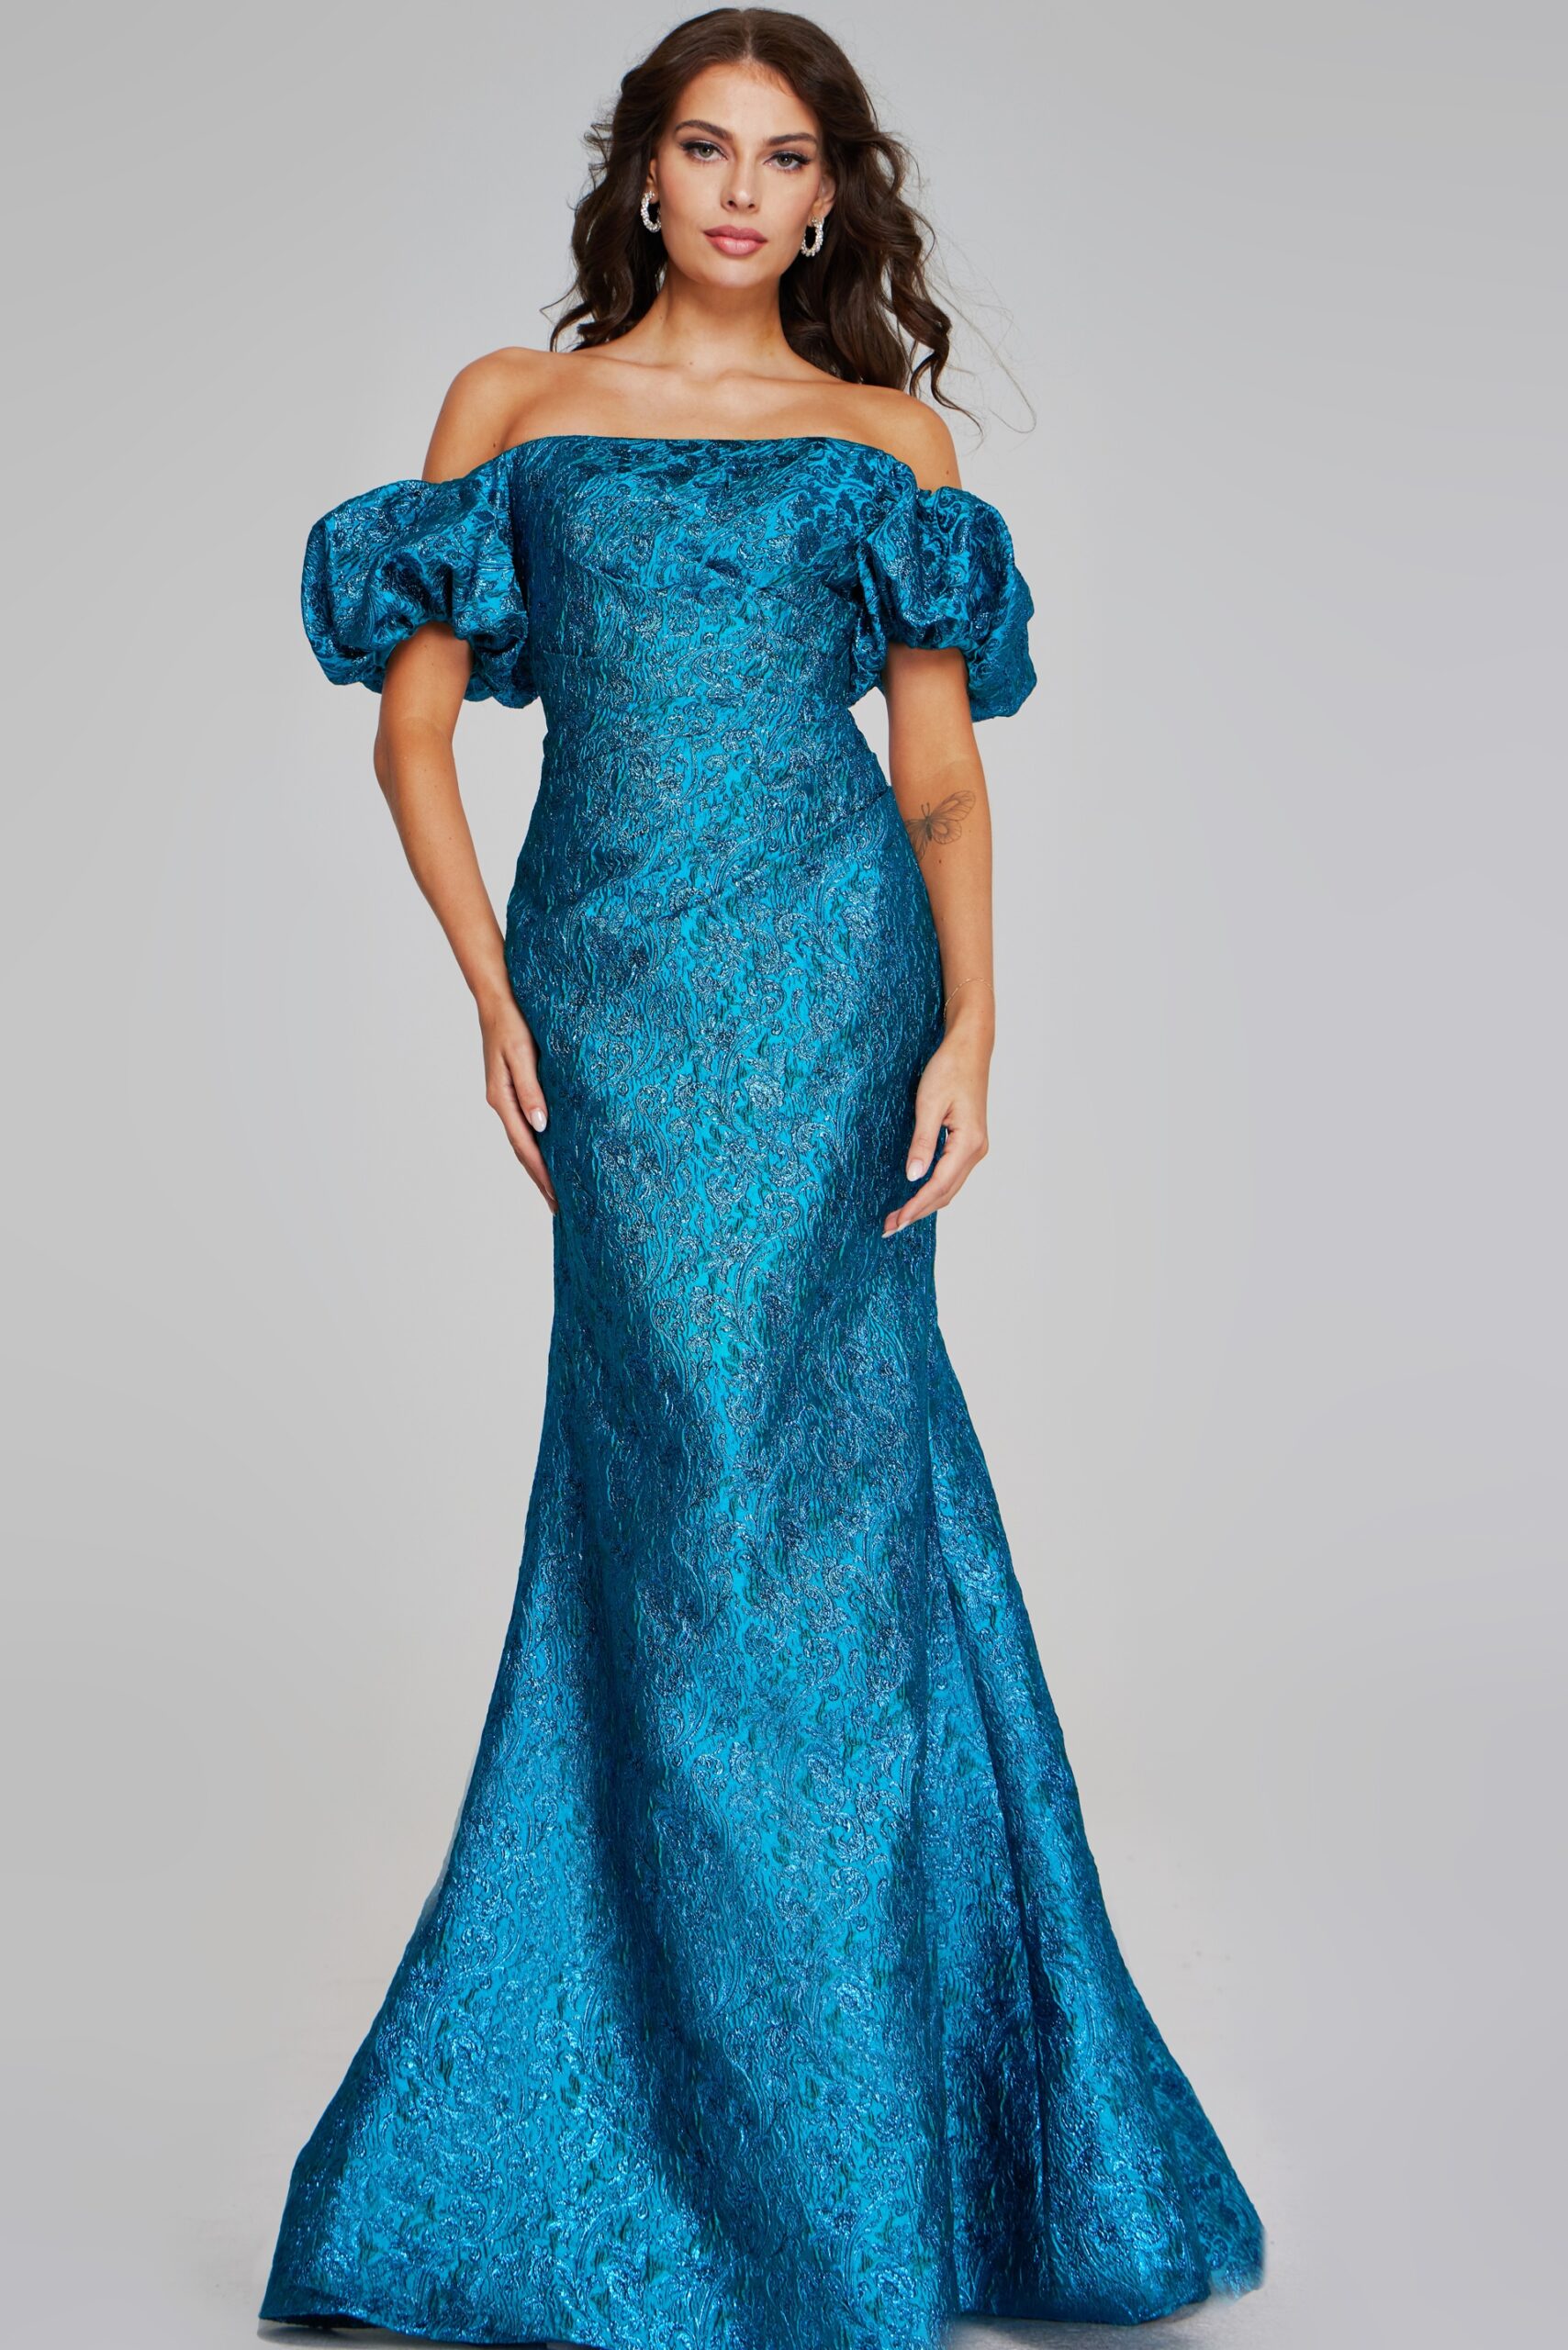 Stunning Off-the-Shoulder Teal Gown with Puff Sleeves 39113